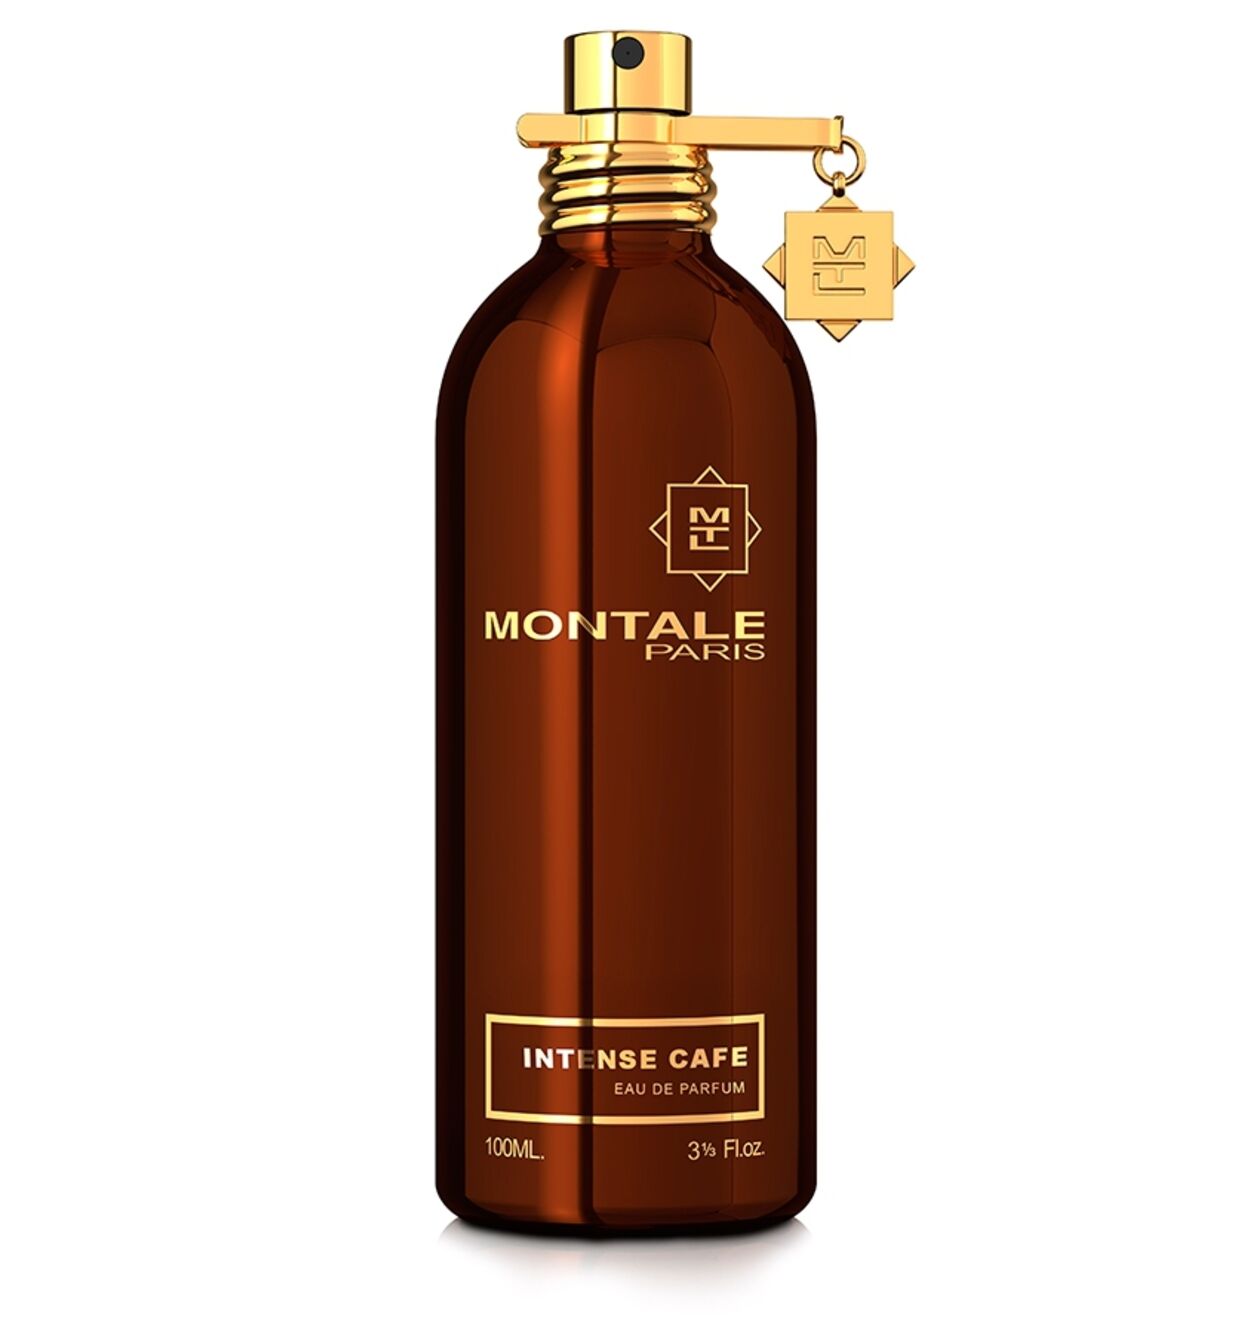 Montale perfume. Духи Монталь intense Cafe. Montale Aoud Forest 50ml. Парфюмерная вода intense Cafe Montale 100 ml. Montale "Aoud Forest" 100 ml.